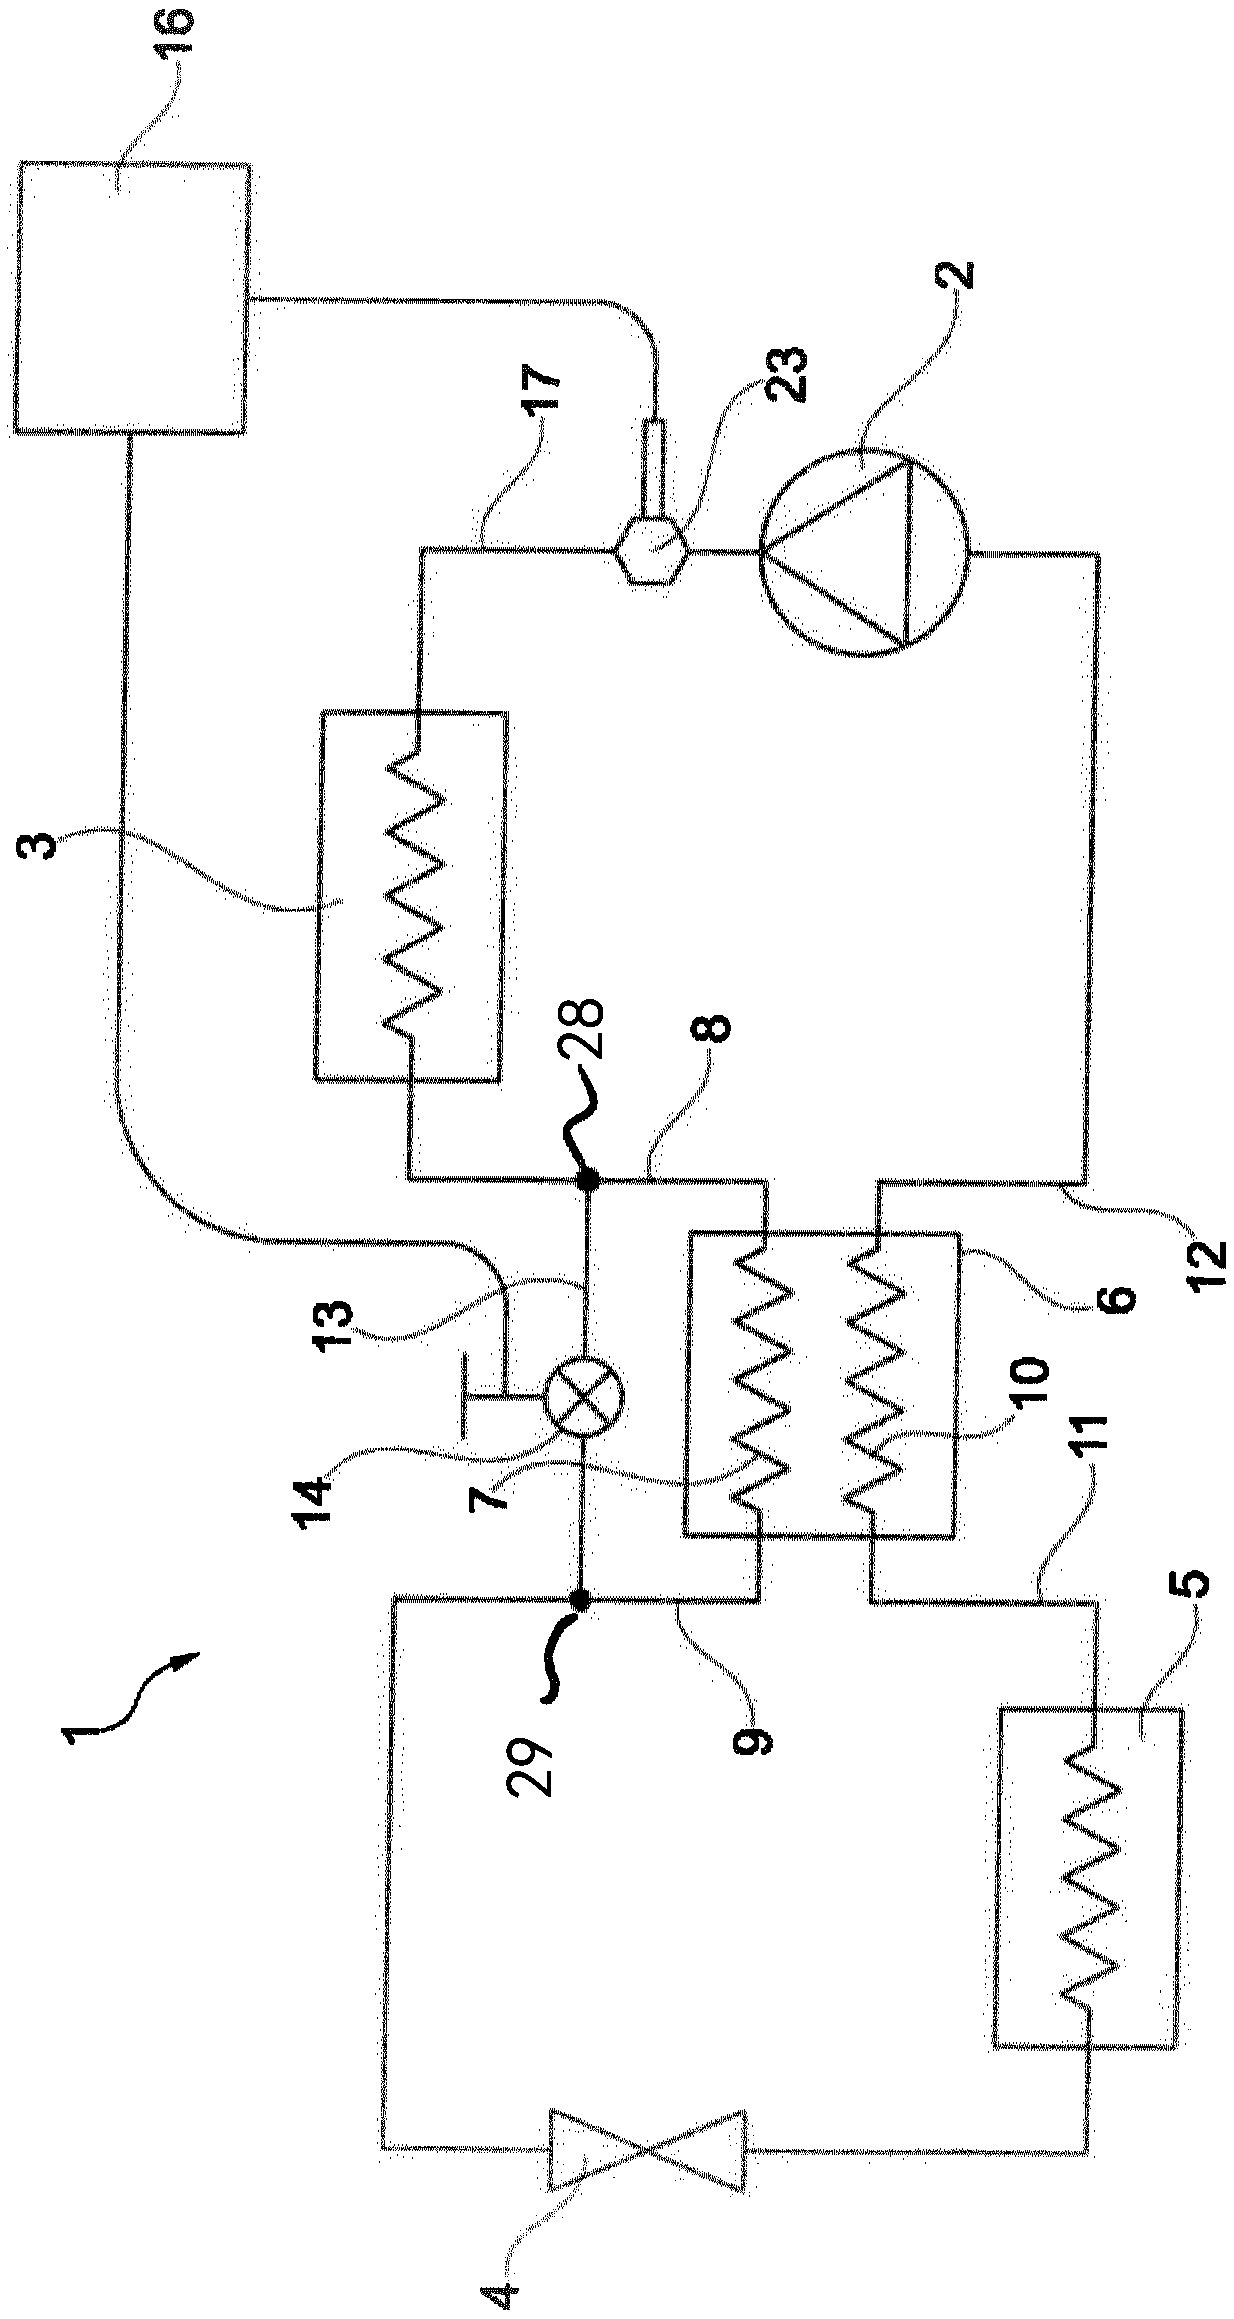 Cooling system with adjustable internal heat exchanger